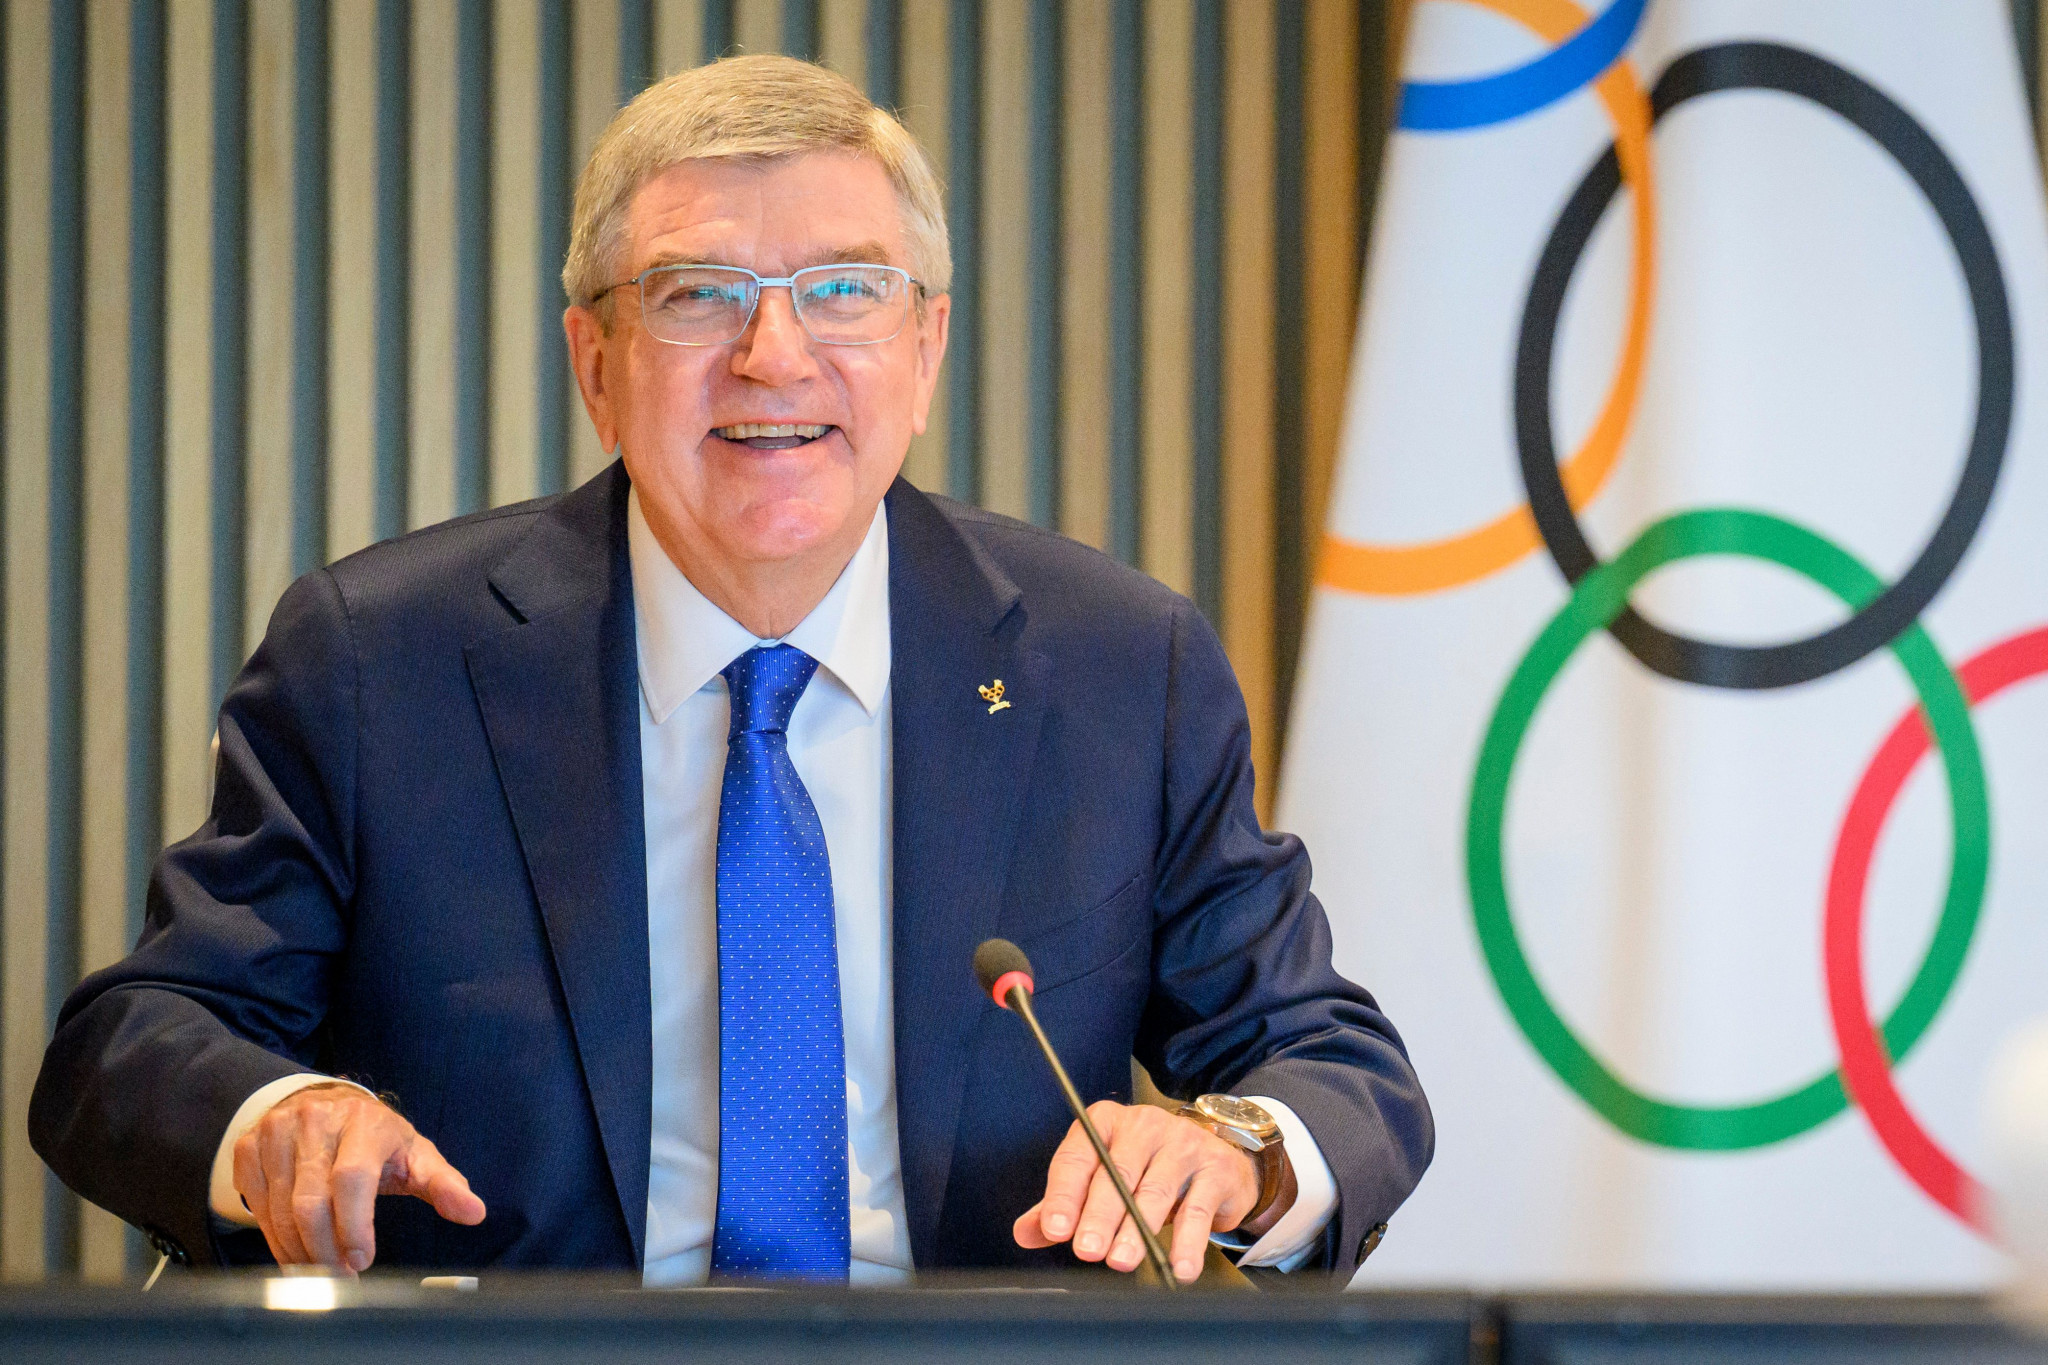 Bach has faith in "Italian friends" to deliver Milan Cortina 2026 Winter Olympics despite "challenges"